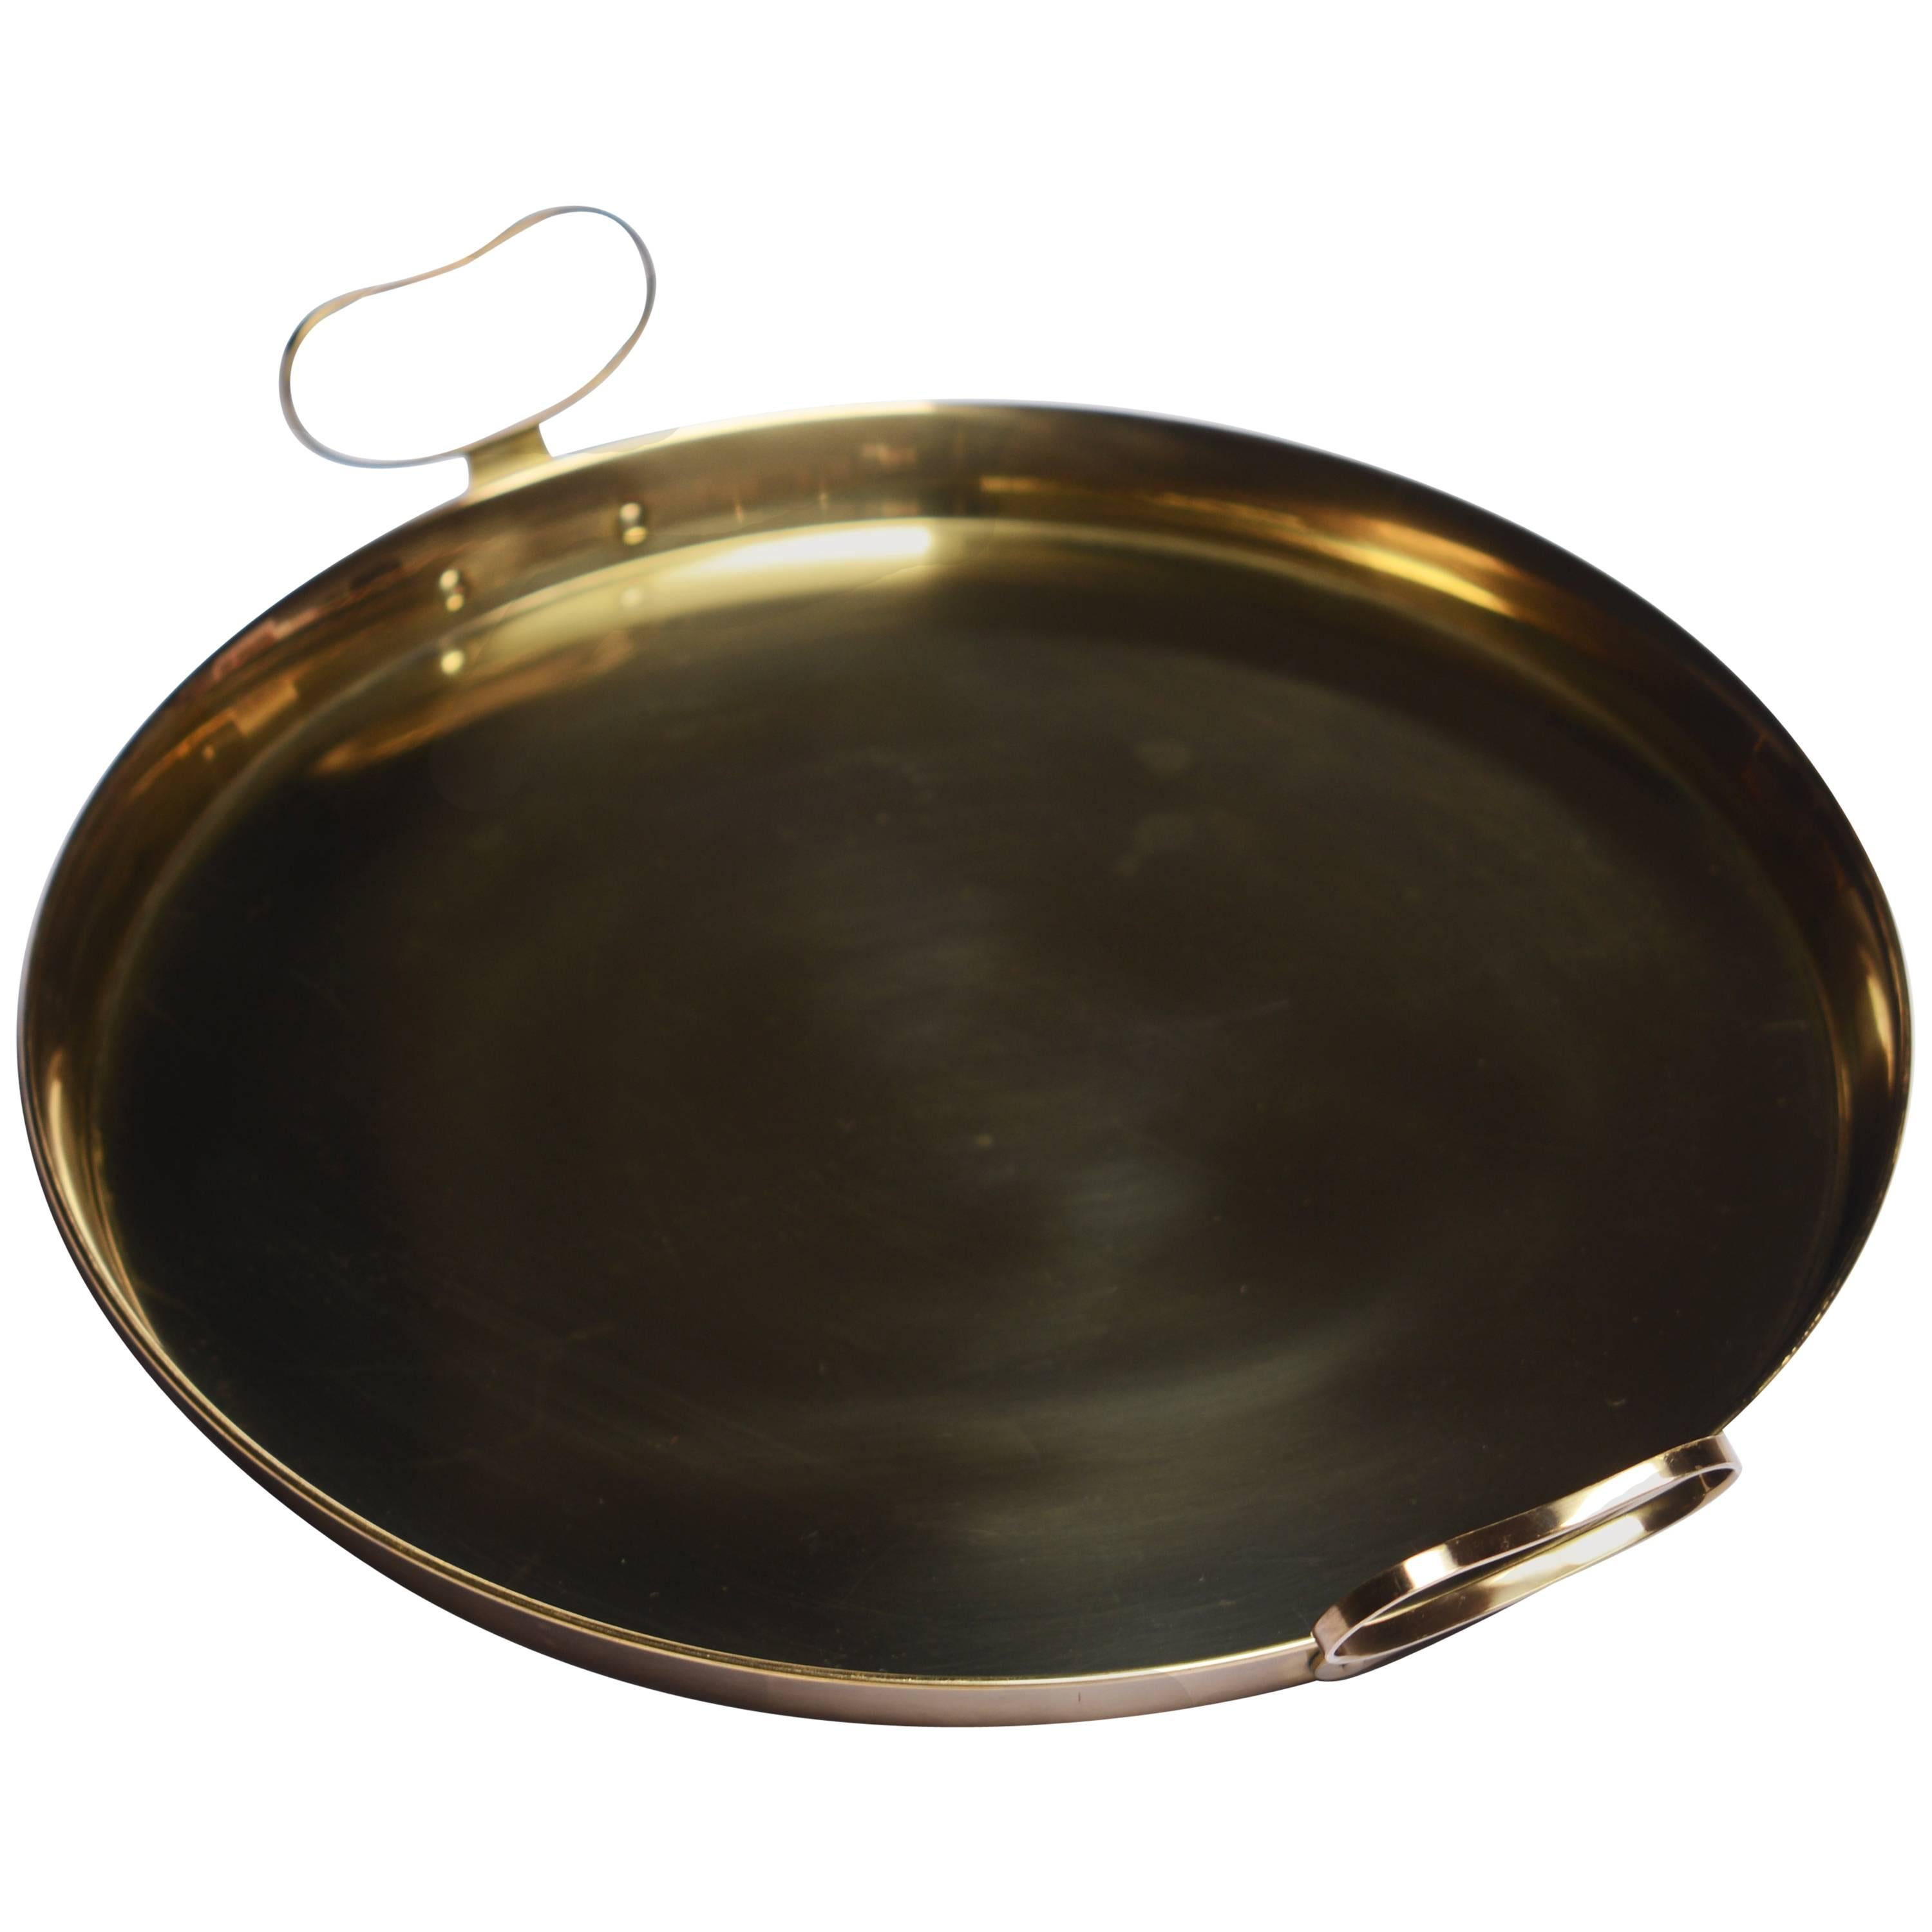 Gunnar Ander Large Brass Tray Made by Ystad Metall, Sweden For Sale